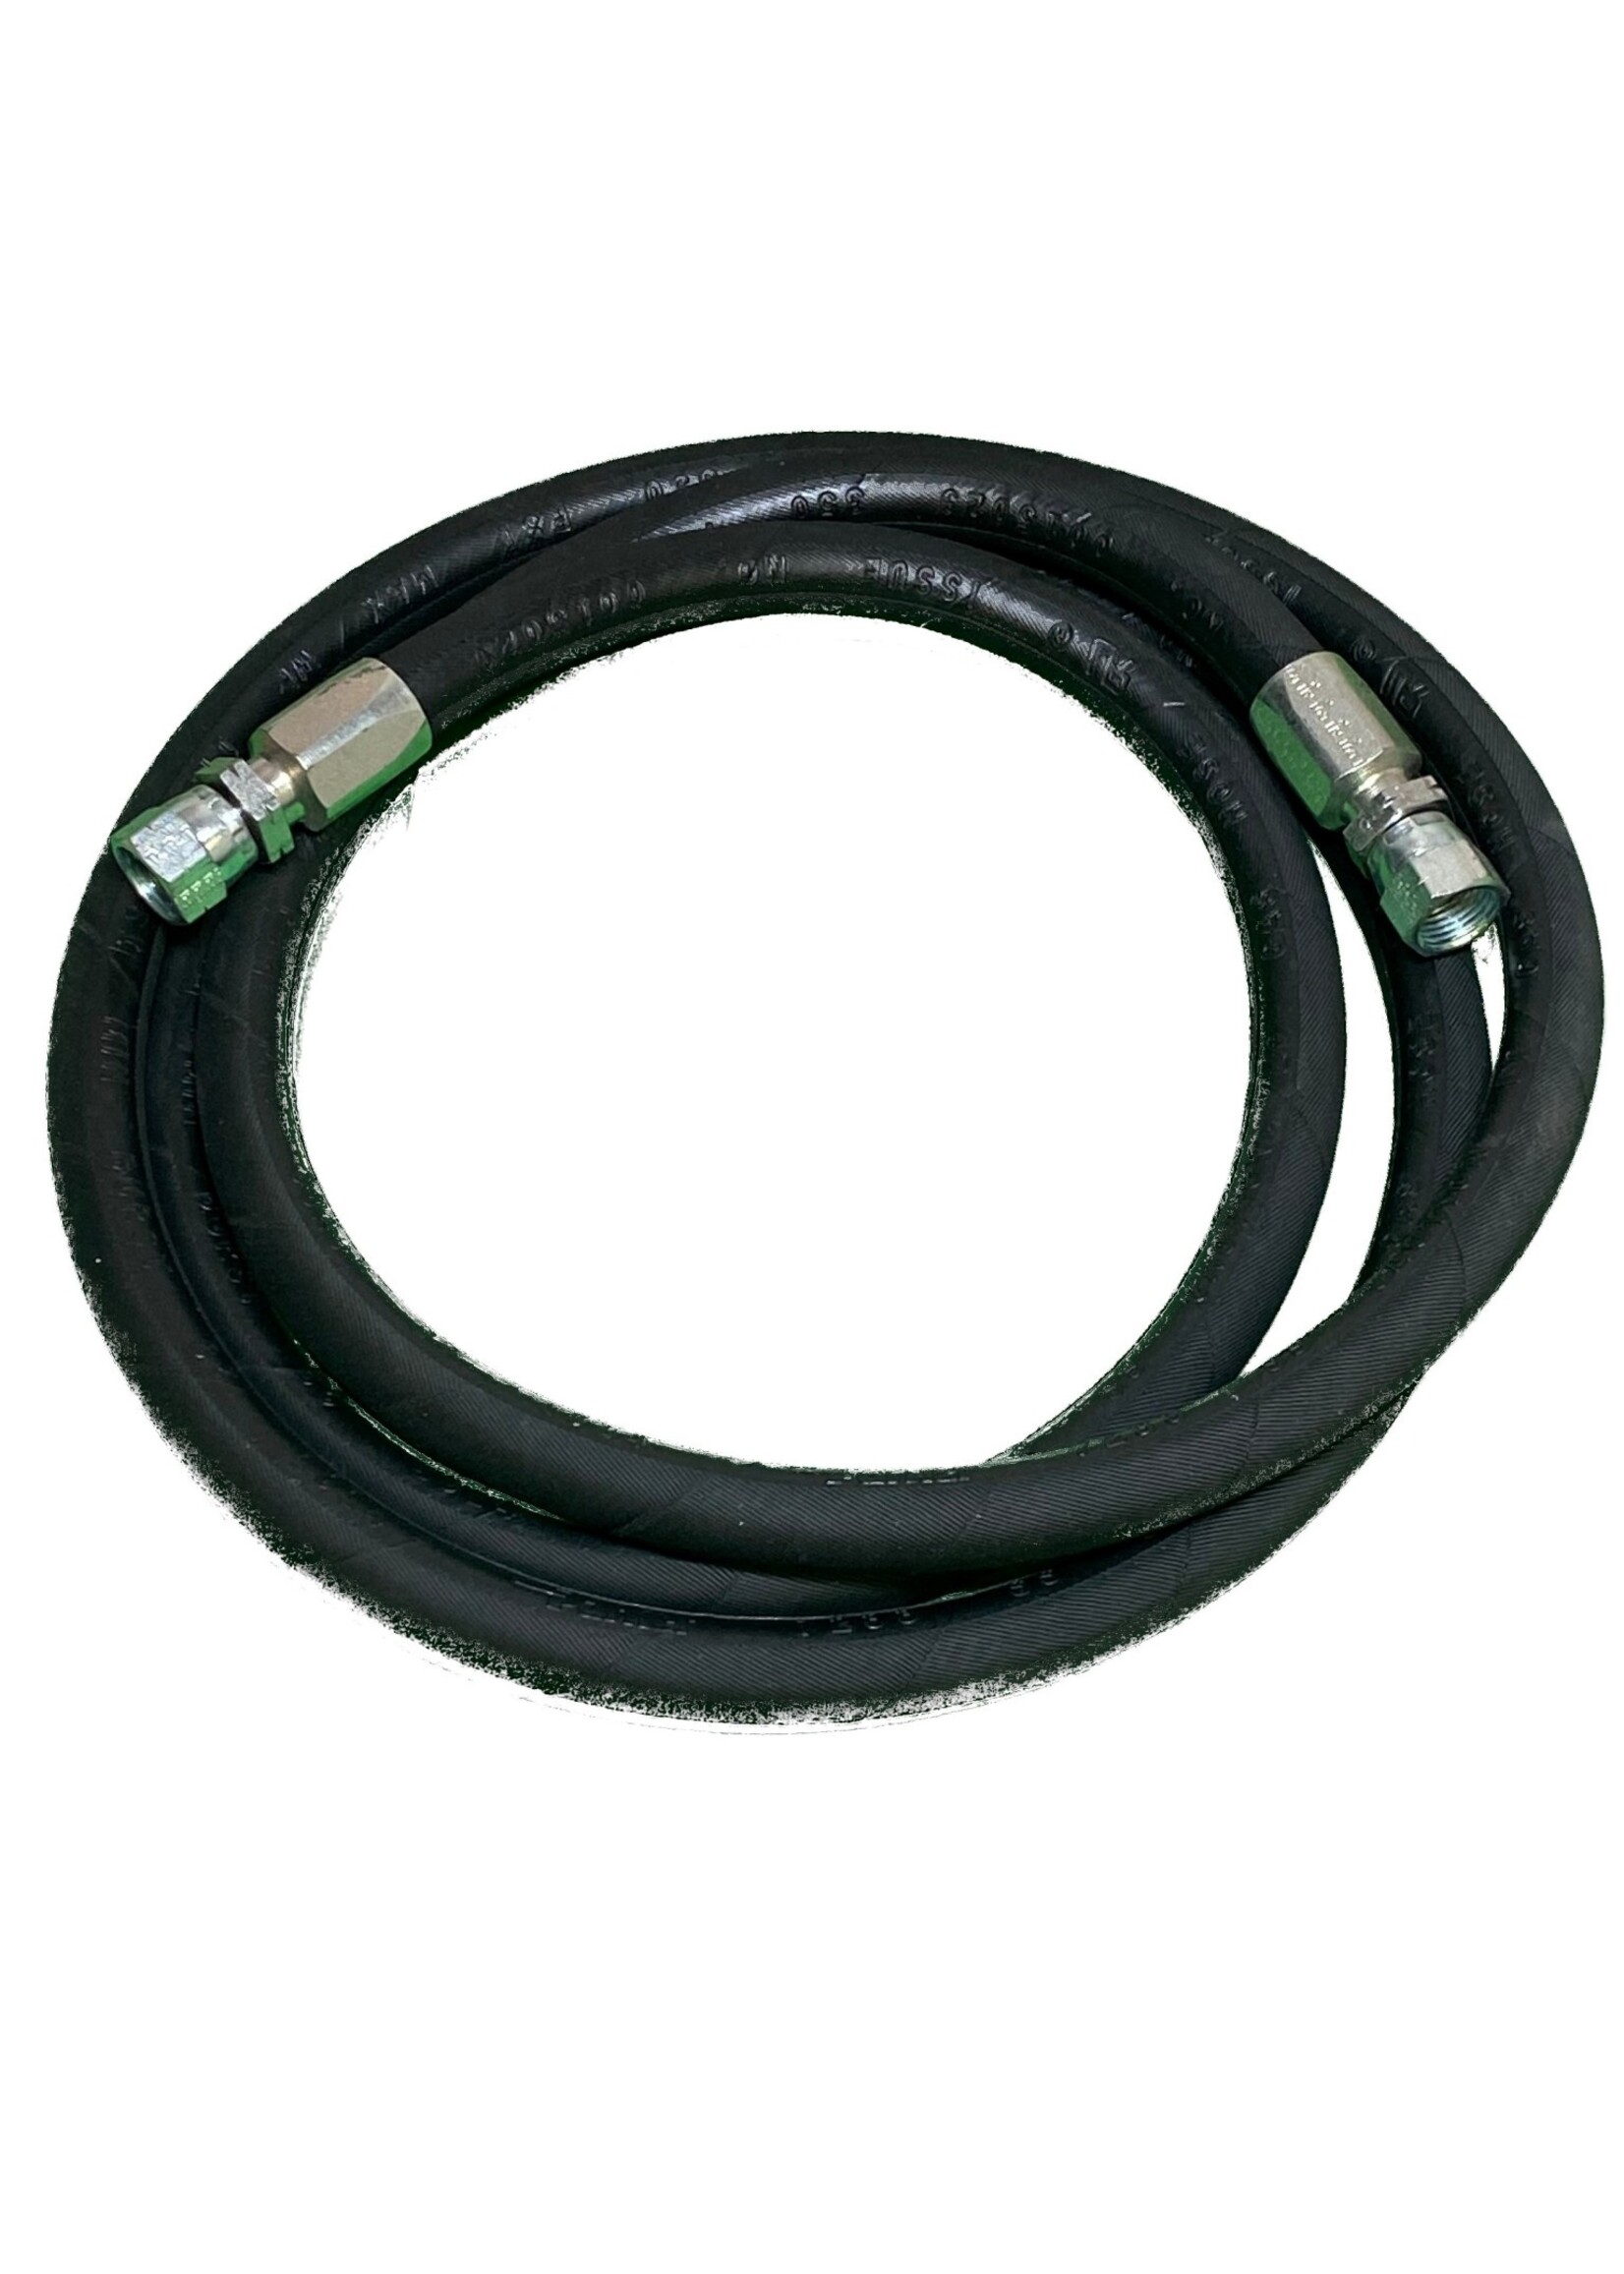 Pro Forge Pro Forge gas hose 8 foot with fittings